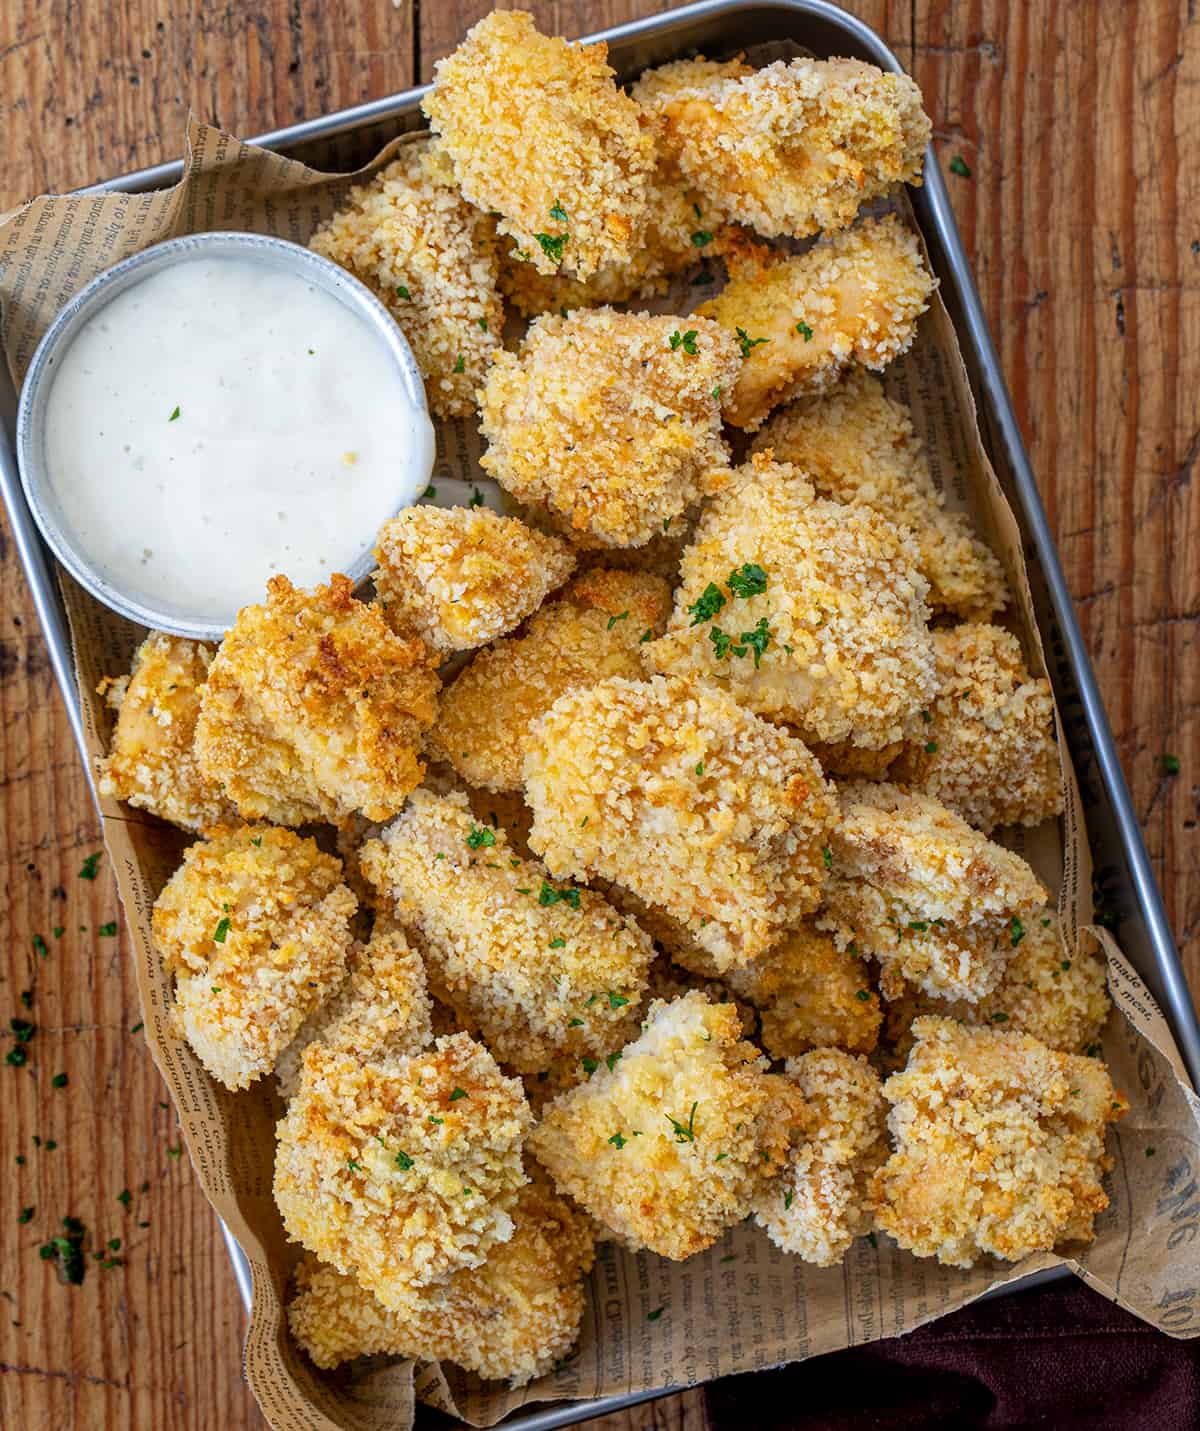 Pan of Baked Popcorn Chicken on a Wooden Table. 